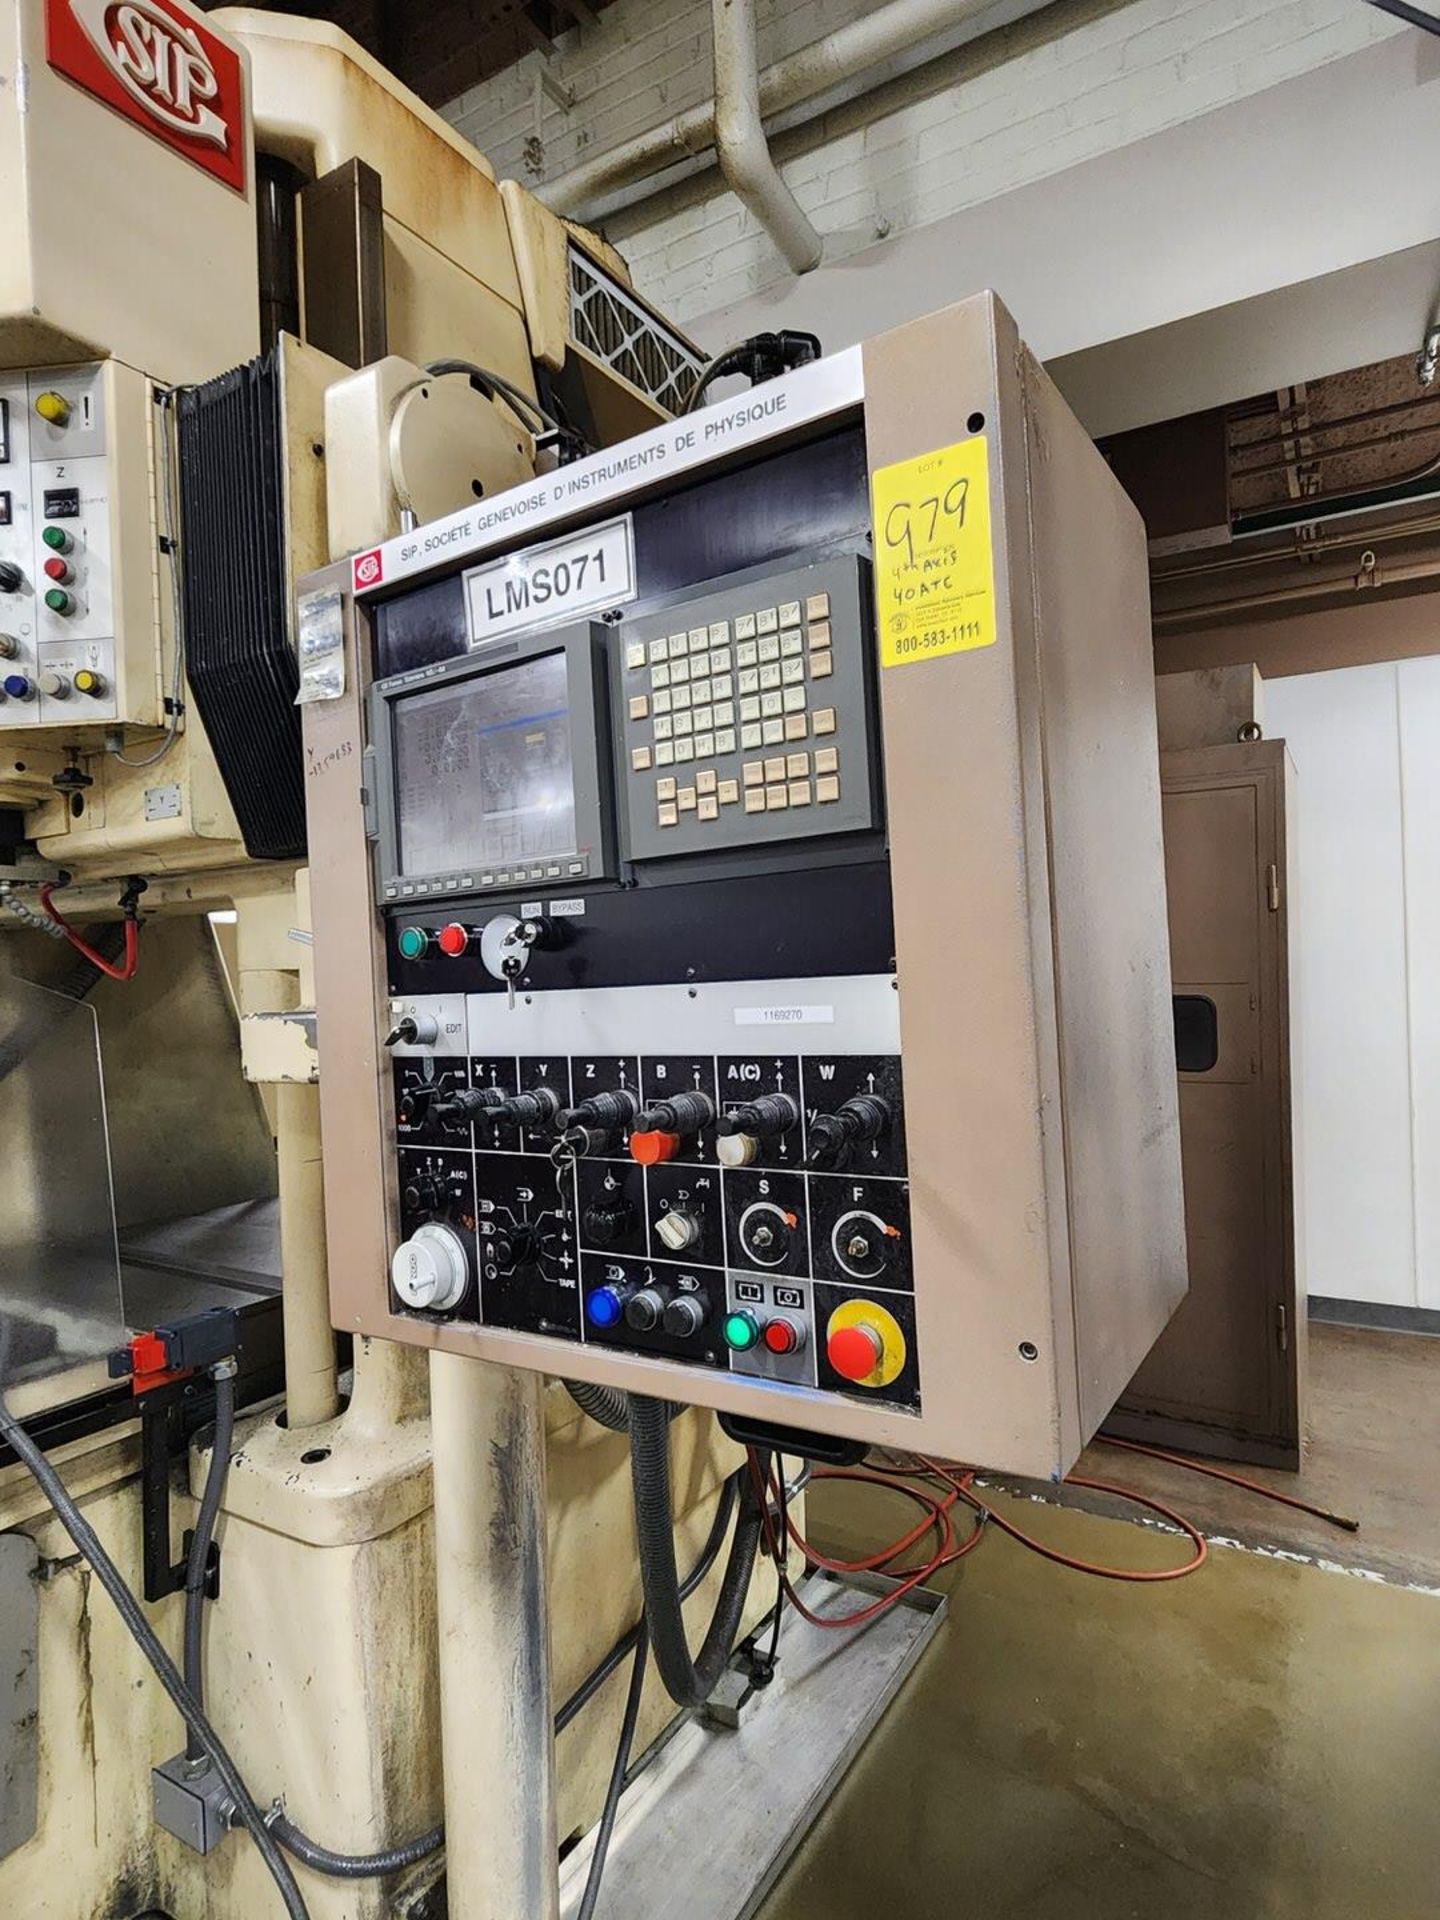 SIP SIP-640 Jig Boring Machine W/ Fanuc Series 16i-M Controller; Cutting Time: 15,304hrs - Image 17 of 36